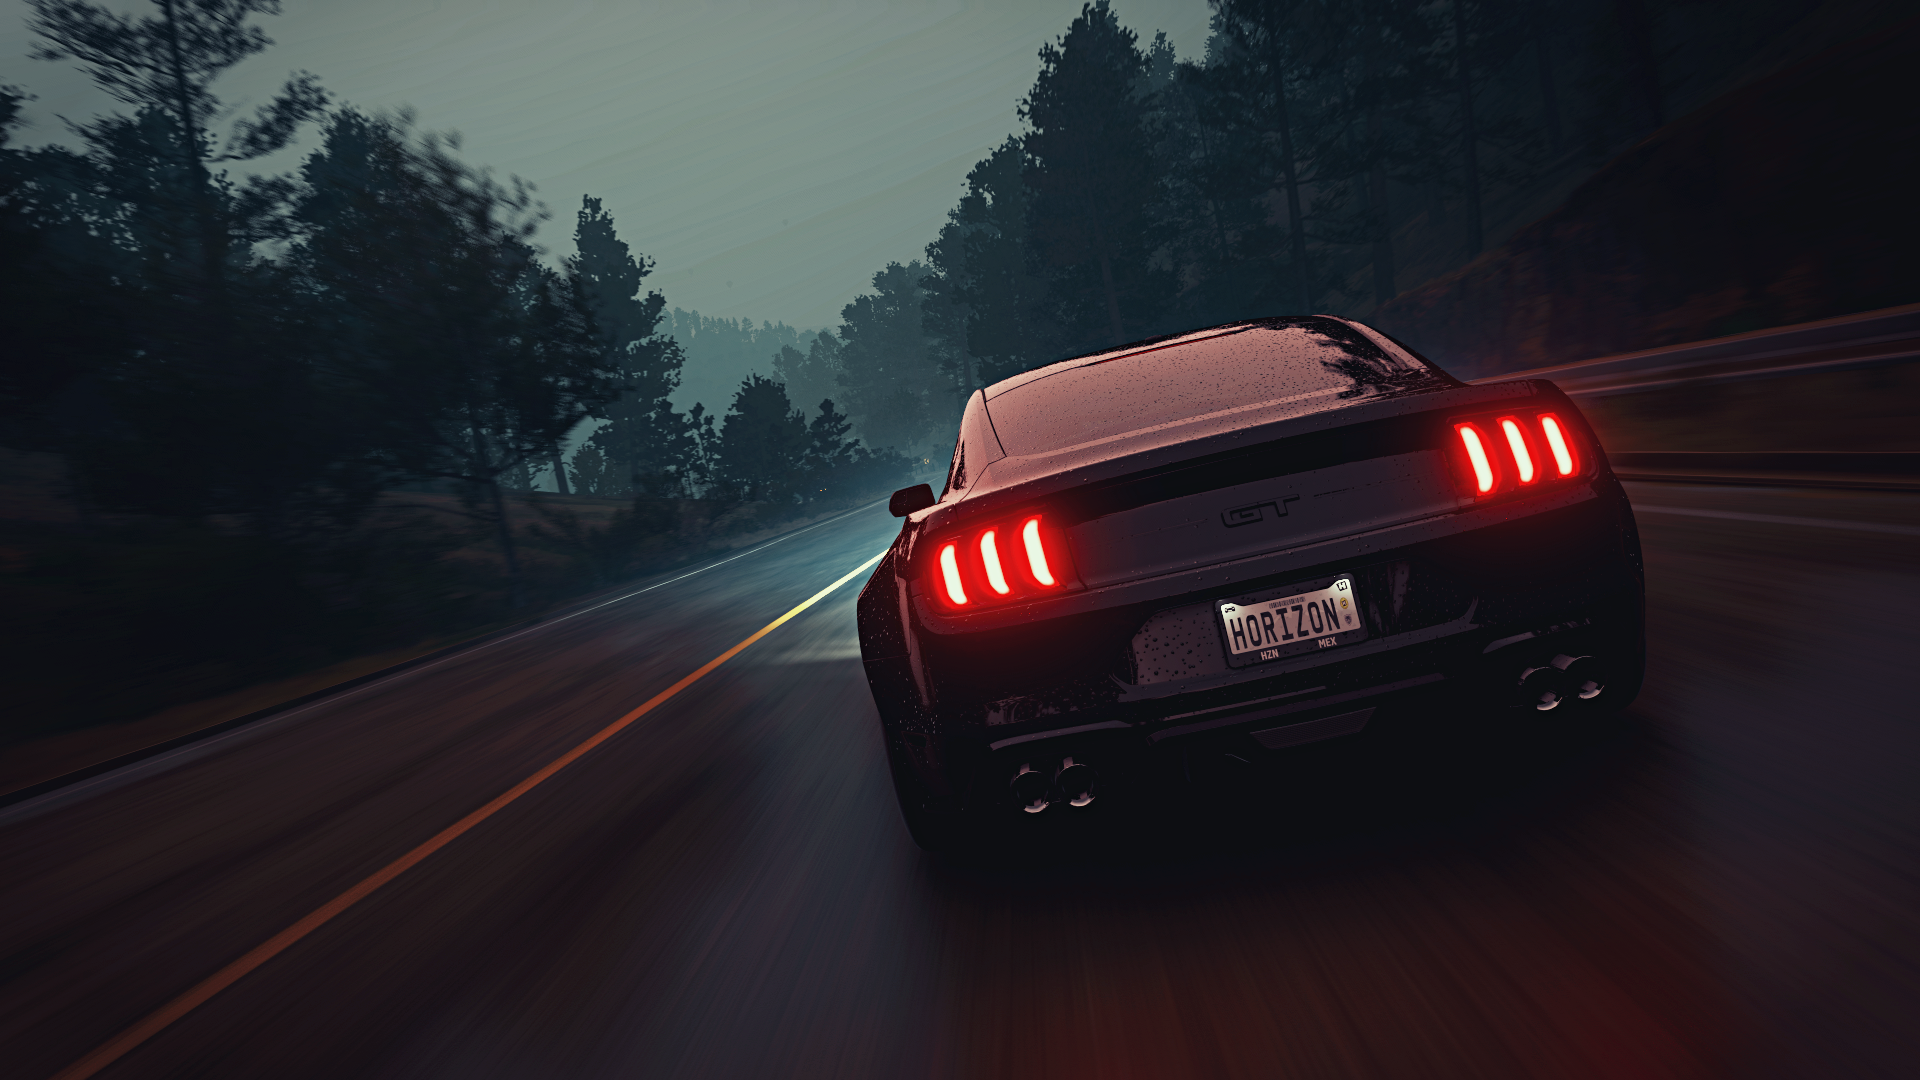 General 1920x1080 Forza Forza Horizon 5 blue red car Ford DeBerti Design Ford Mustang road digital art muscle cars pony cars American cars PlaygroundGames dark video games trees video game art rear view licence plates taillights driving motion blur blurred vehicle